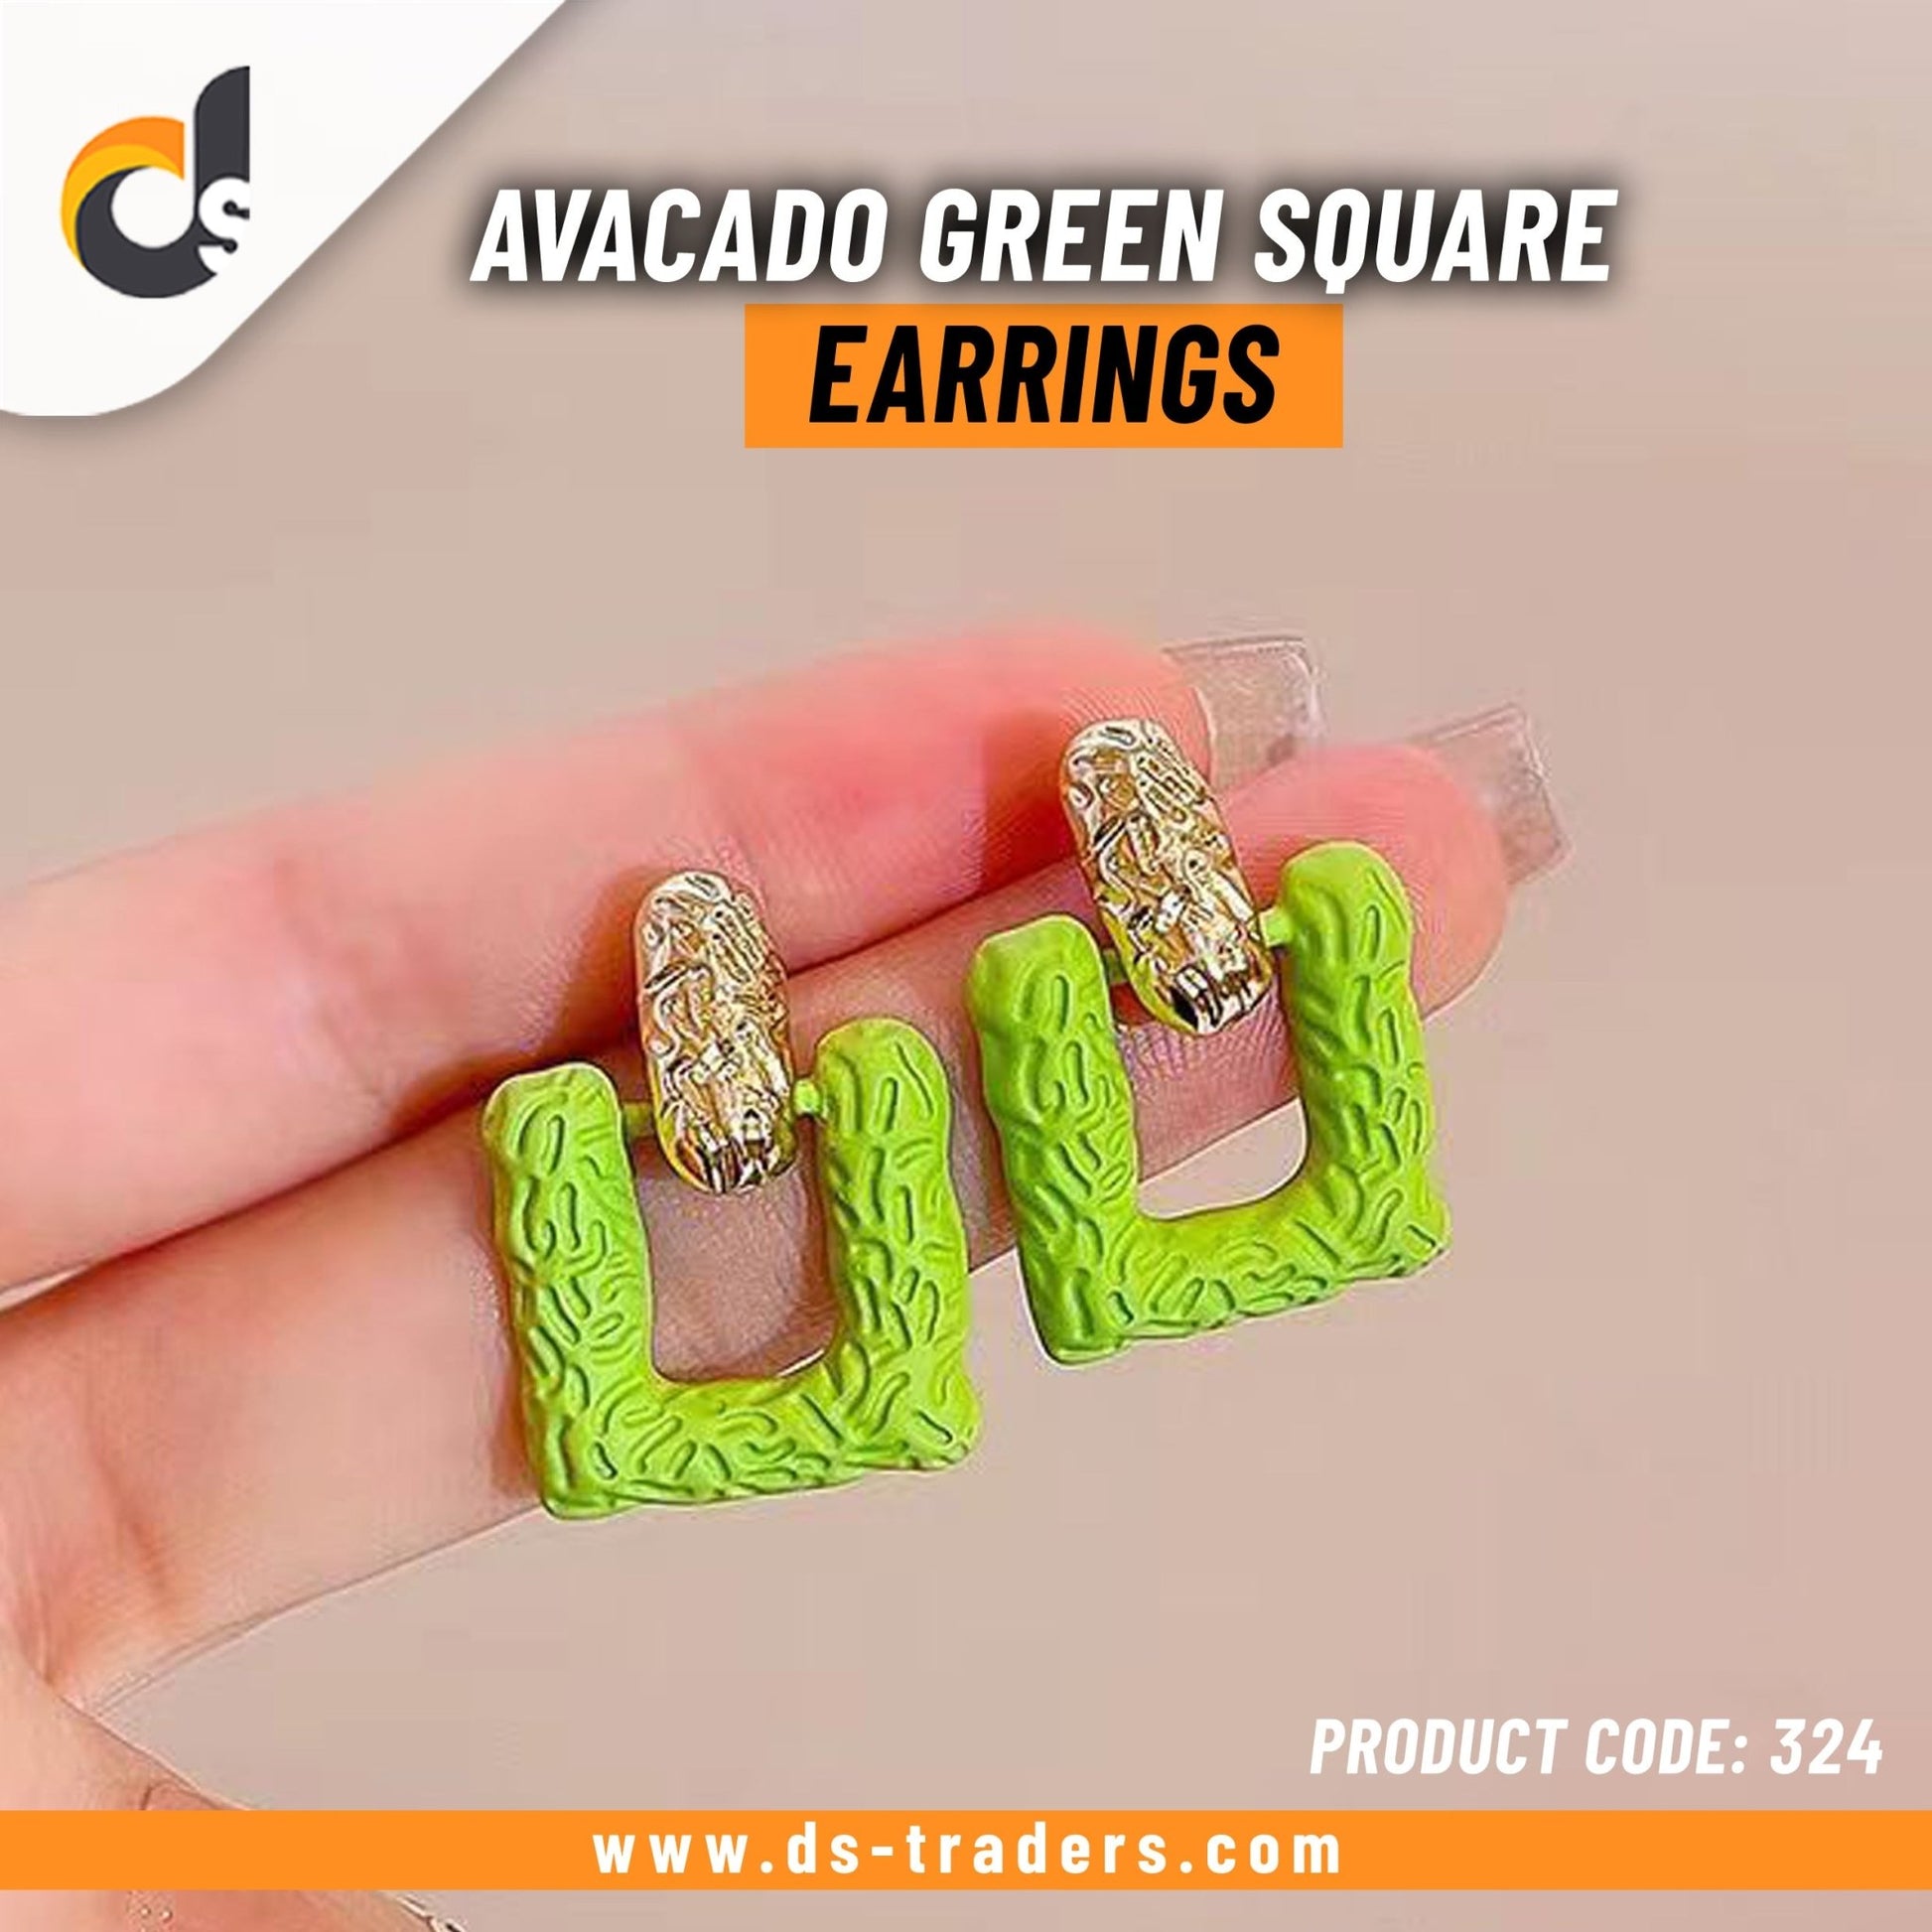 Avacado Green Square Earrings - DS Traders